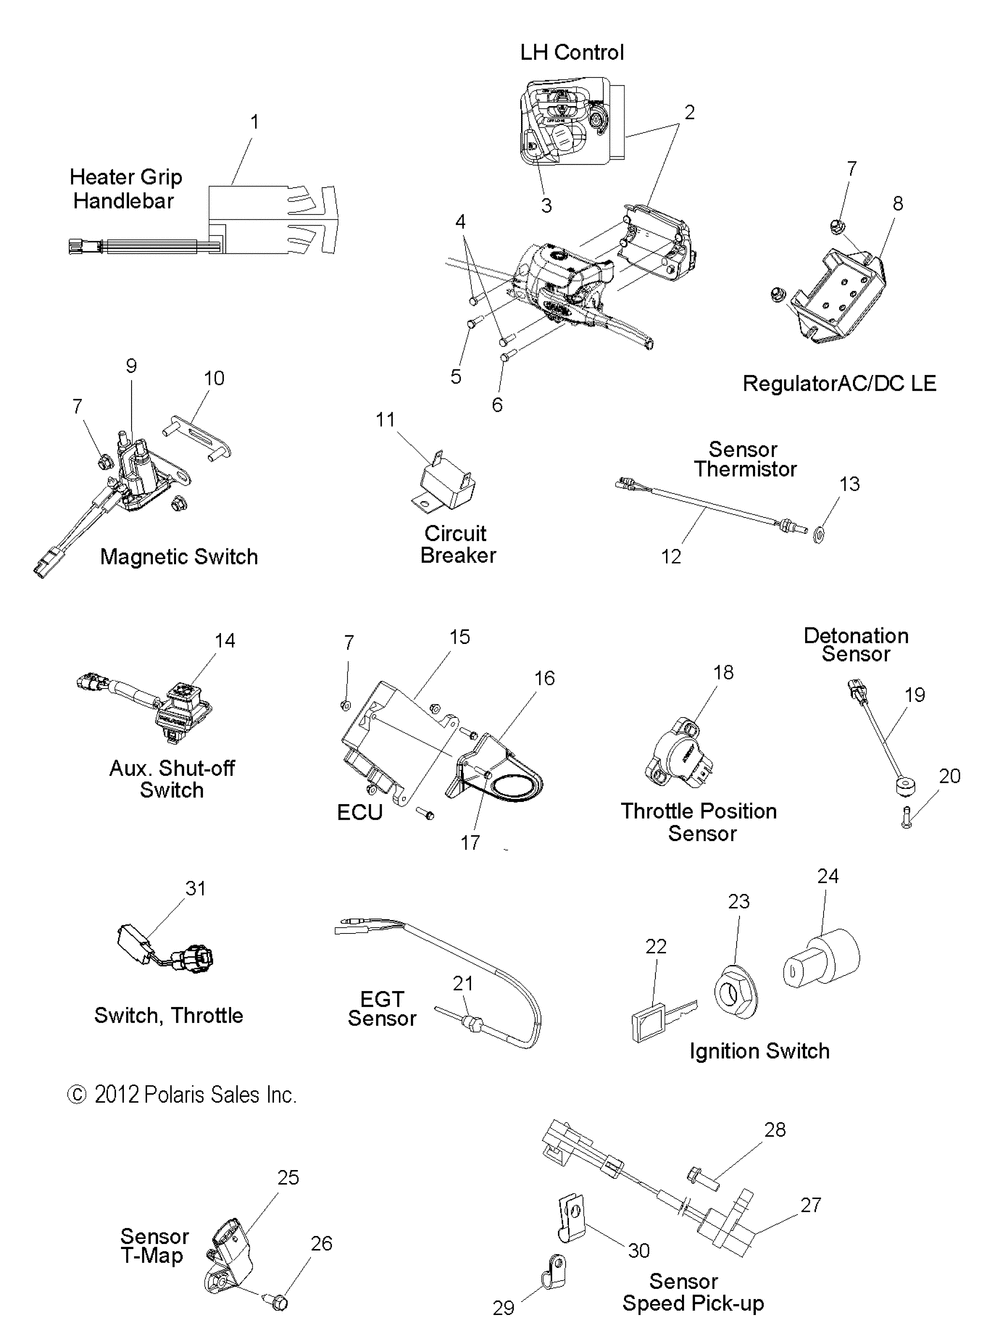 Electrical switches sensors and components - s13cb6_cp6